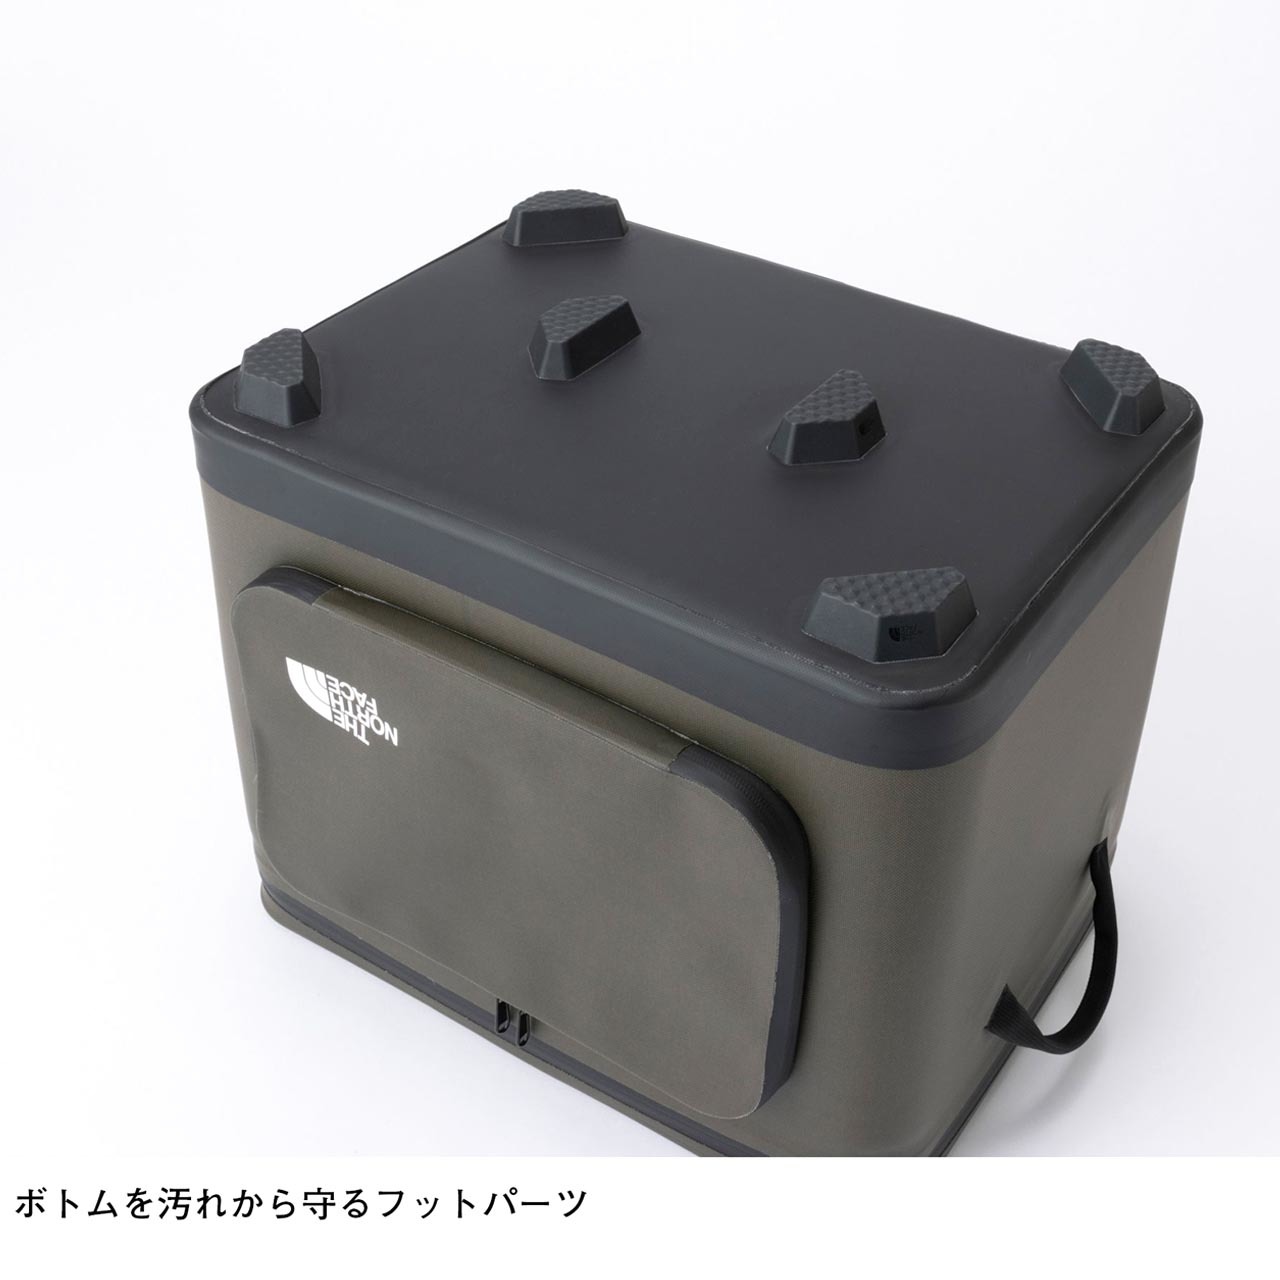 THE NORTH FACE [ザ・ノース・フェイス] Fieludens Gear Container [NM82235]_f0051306_06005837.jpg